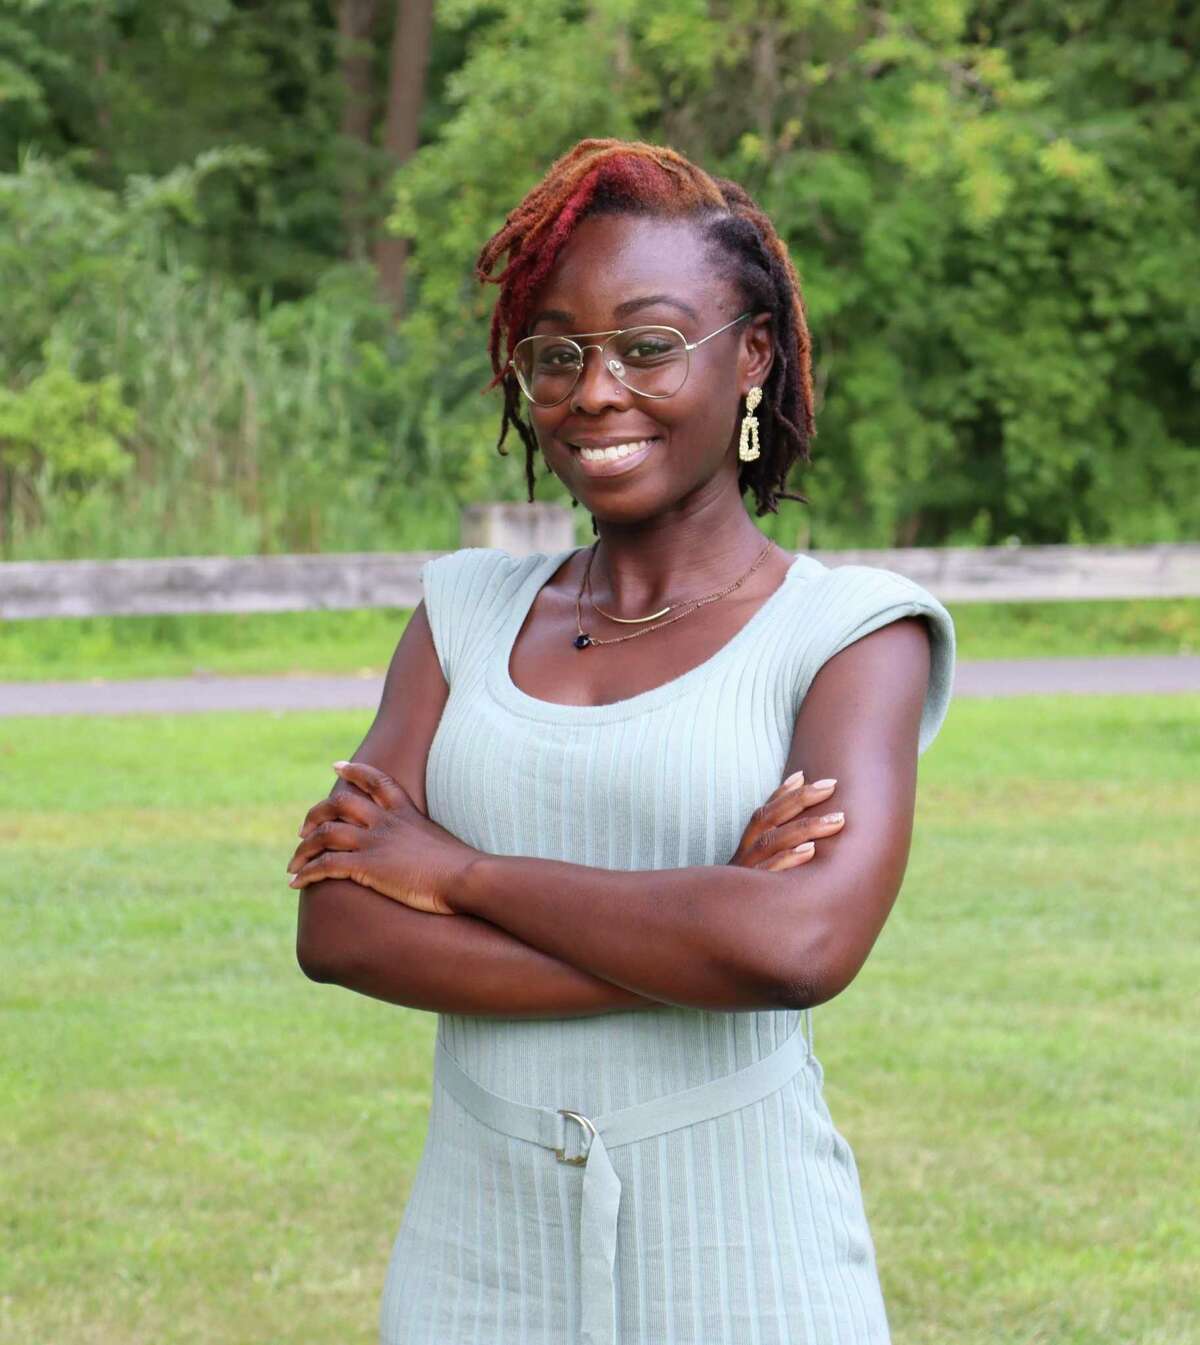 Shanay Fulton is a Democrat running for Middletown’s Planning and Zoning Commission.